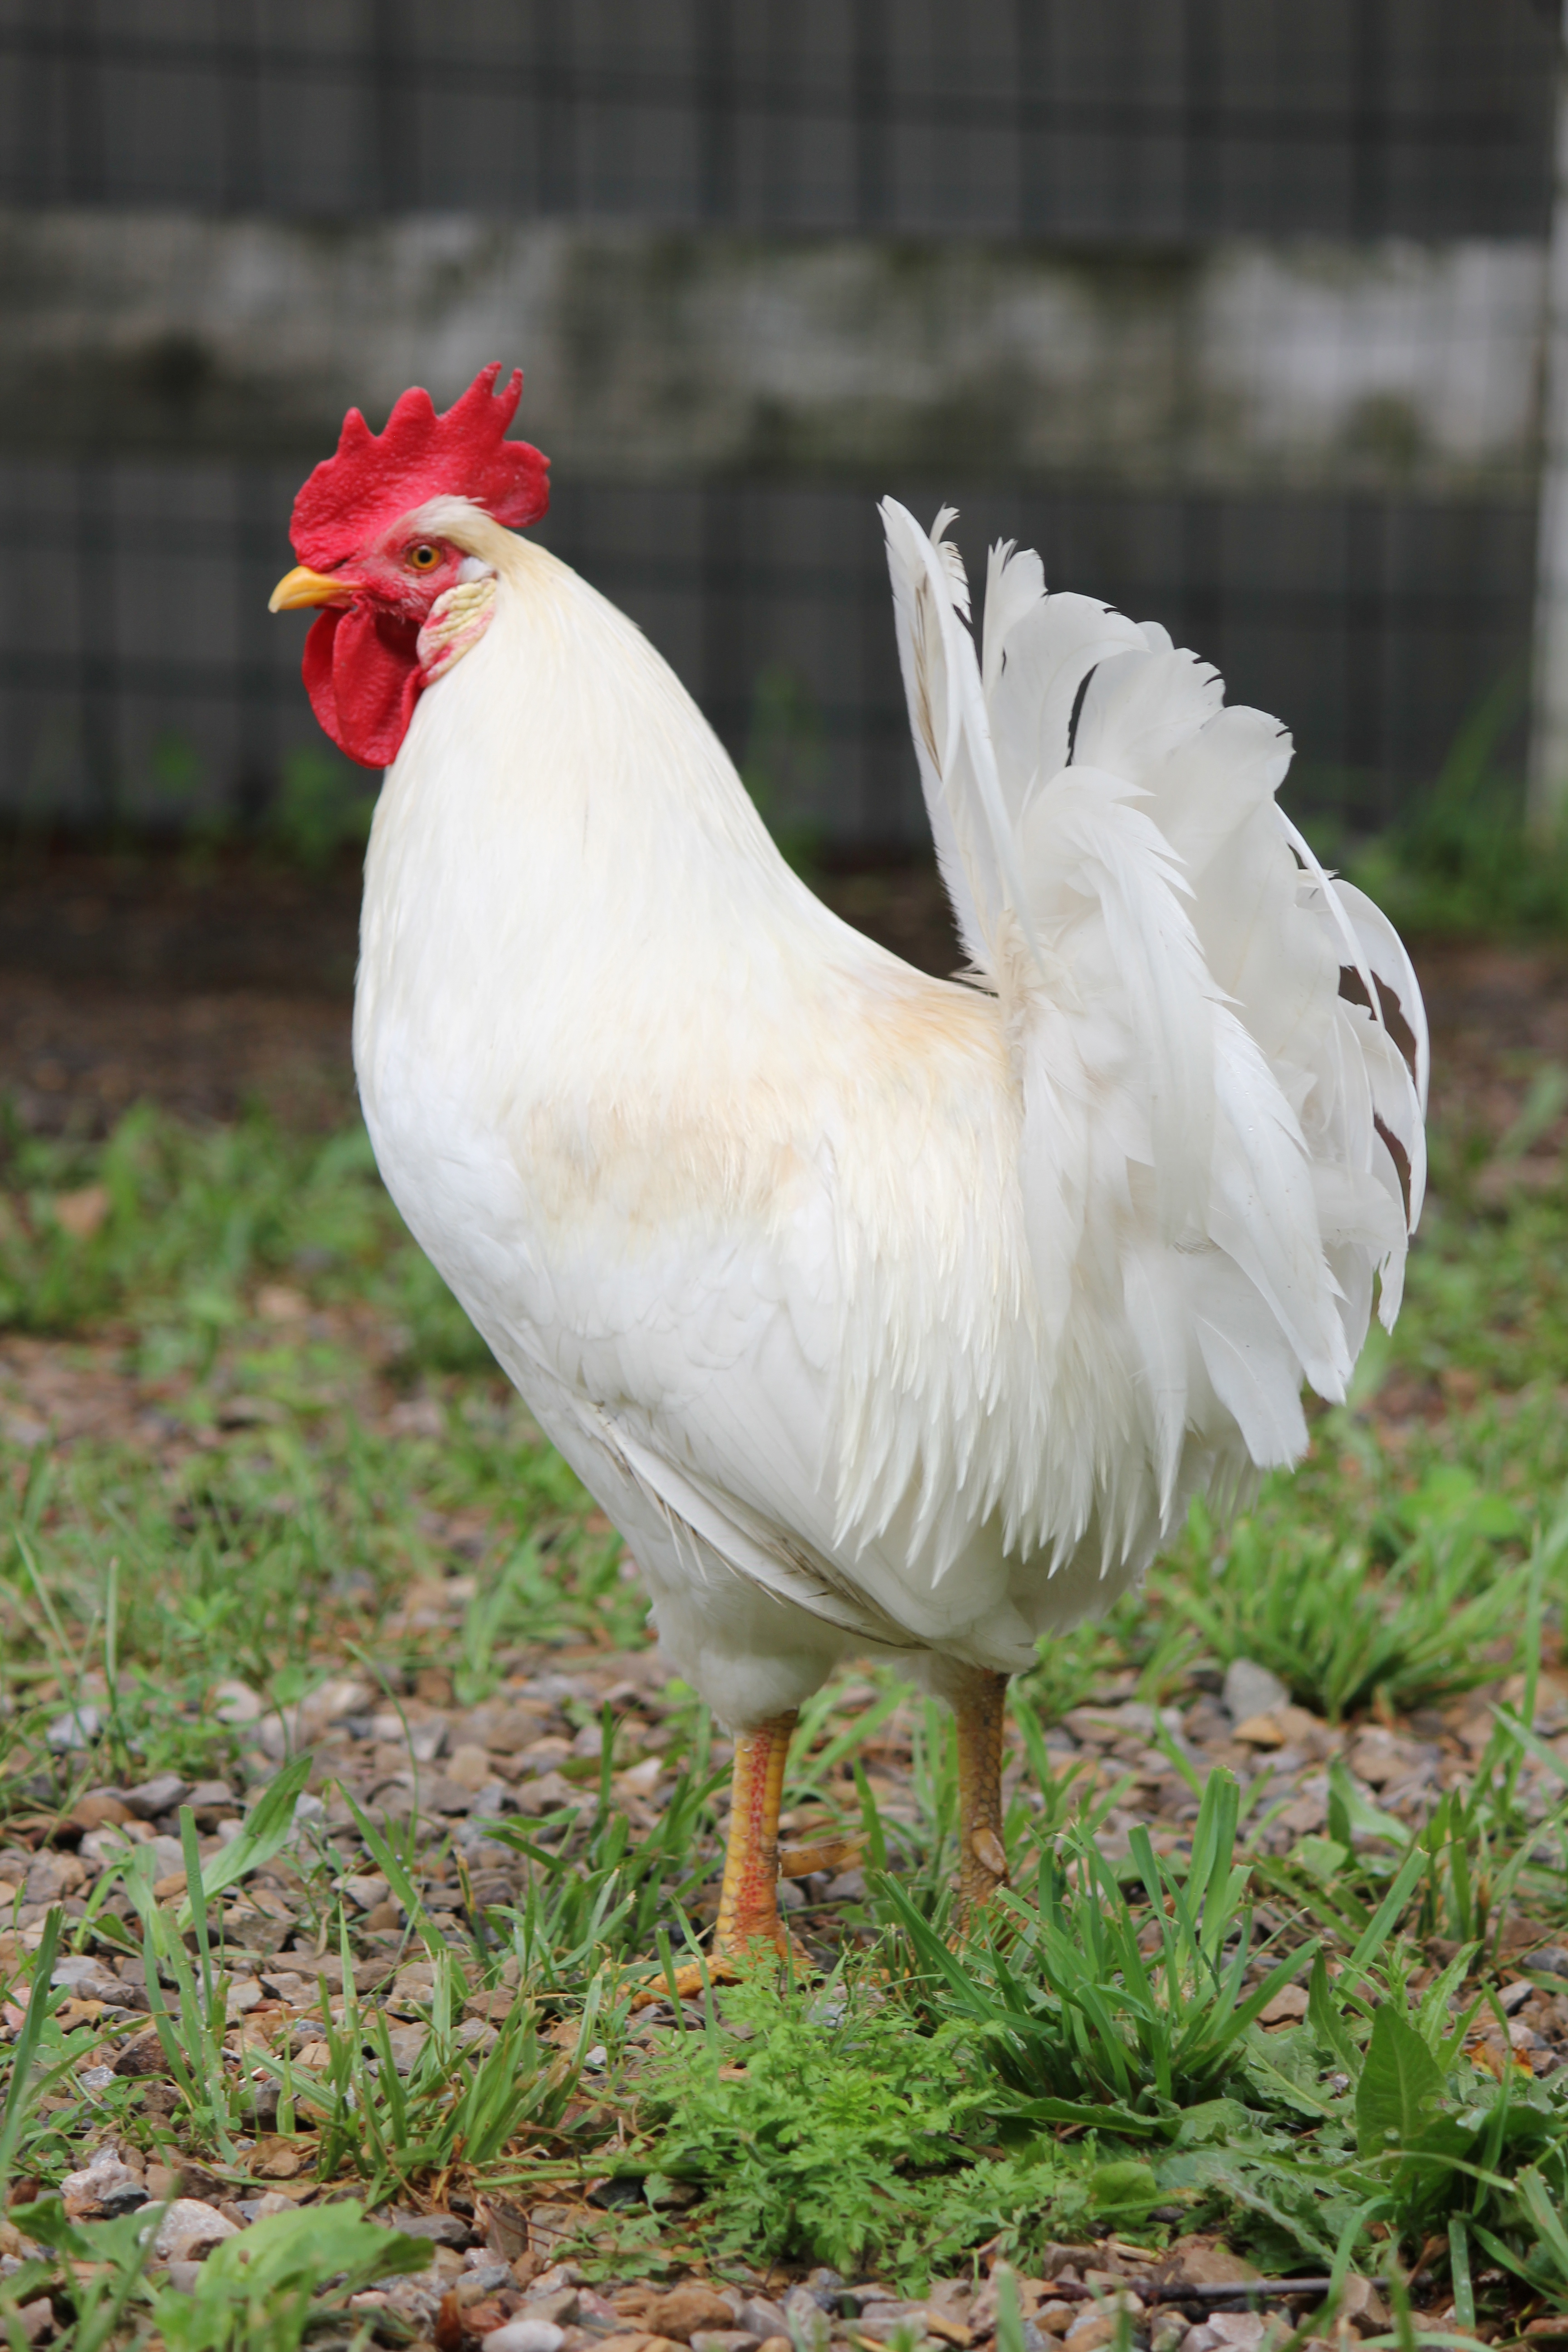 Icelandic Rooster (foundation rooster to all of the others) He has a light tan saddle feathers.